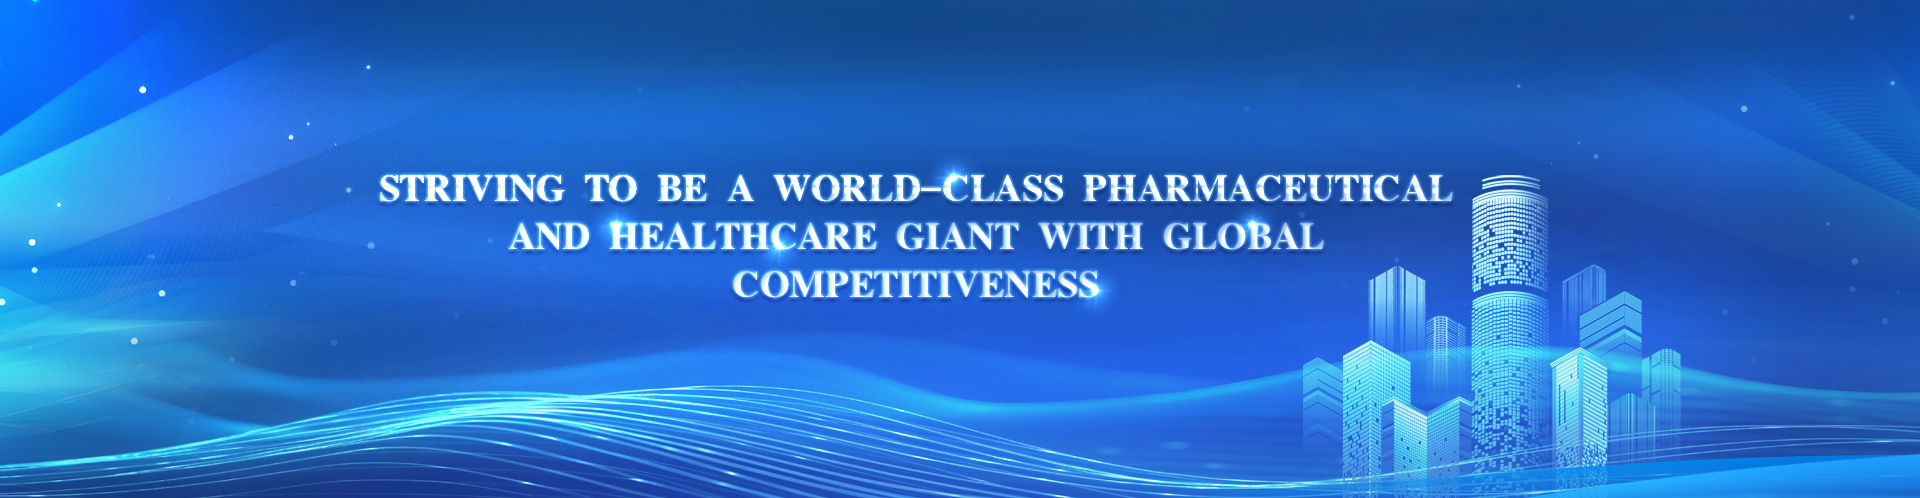 Striving to be a world-class pharmaceutical and healthcare giant with global competitiveness 